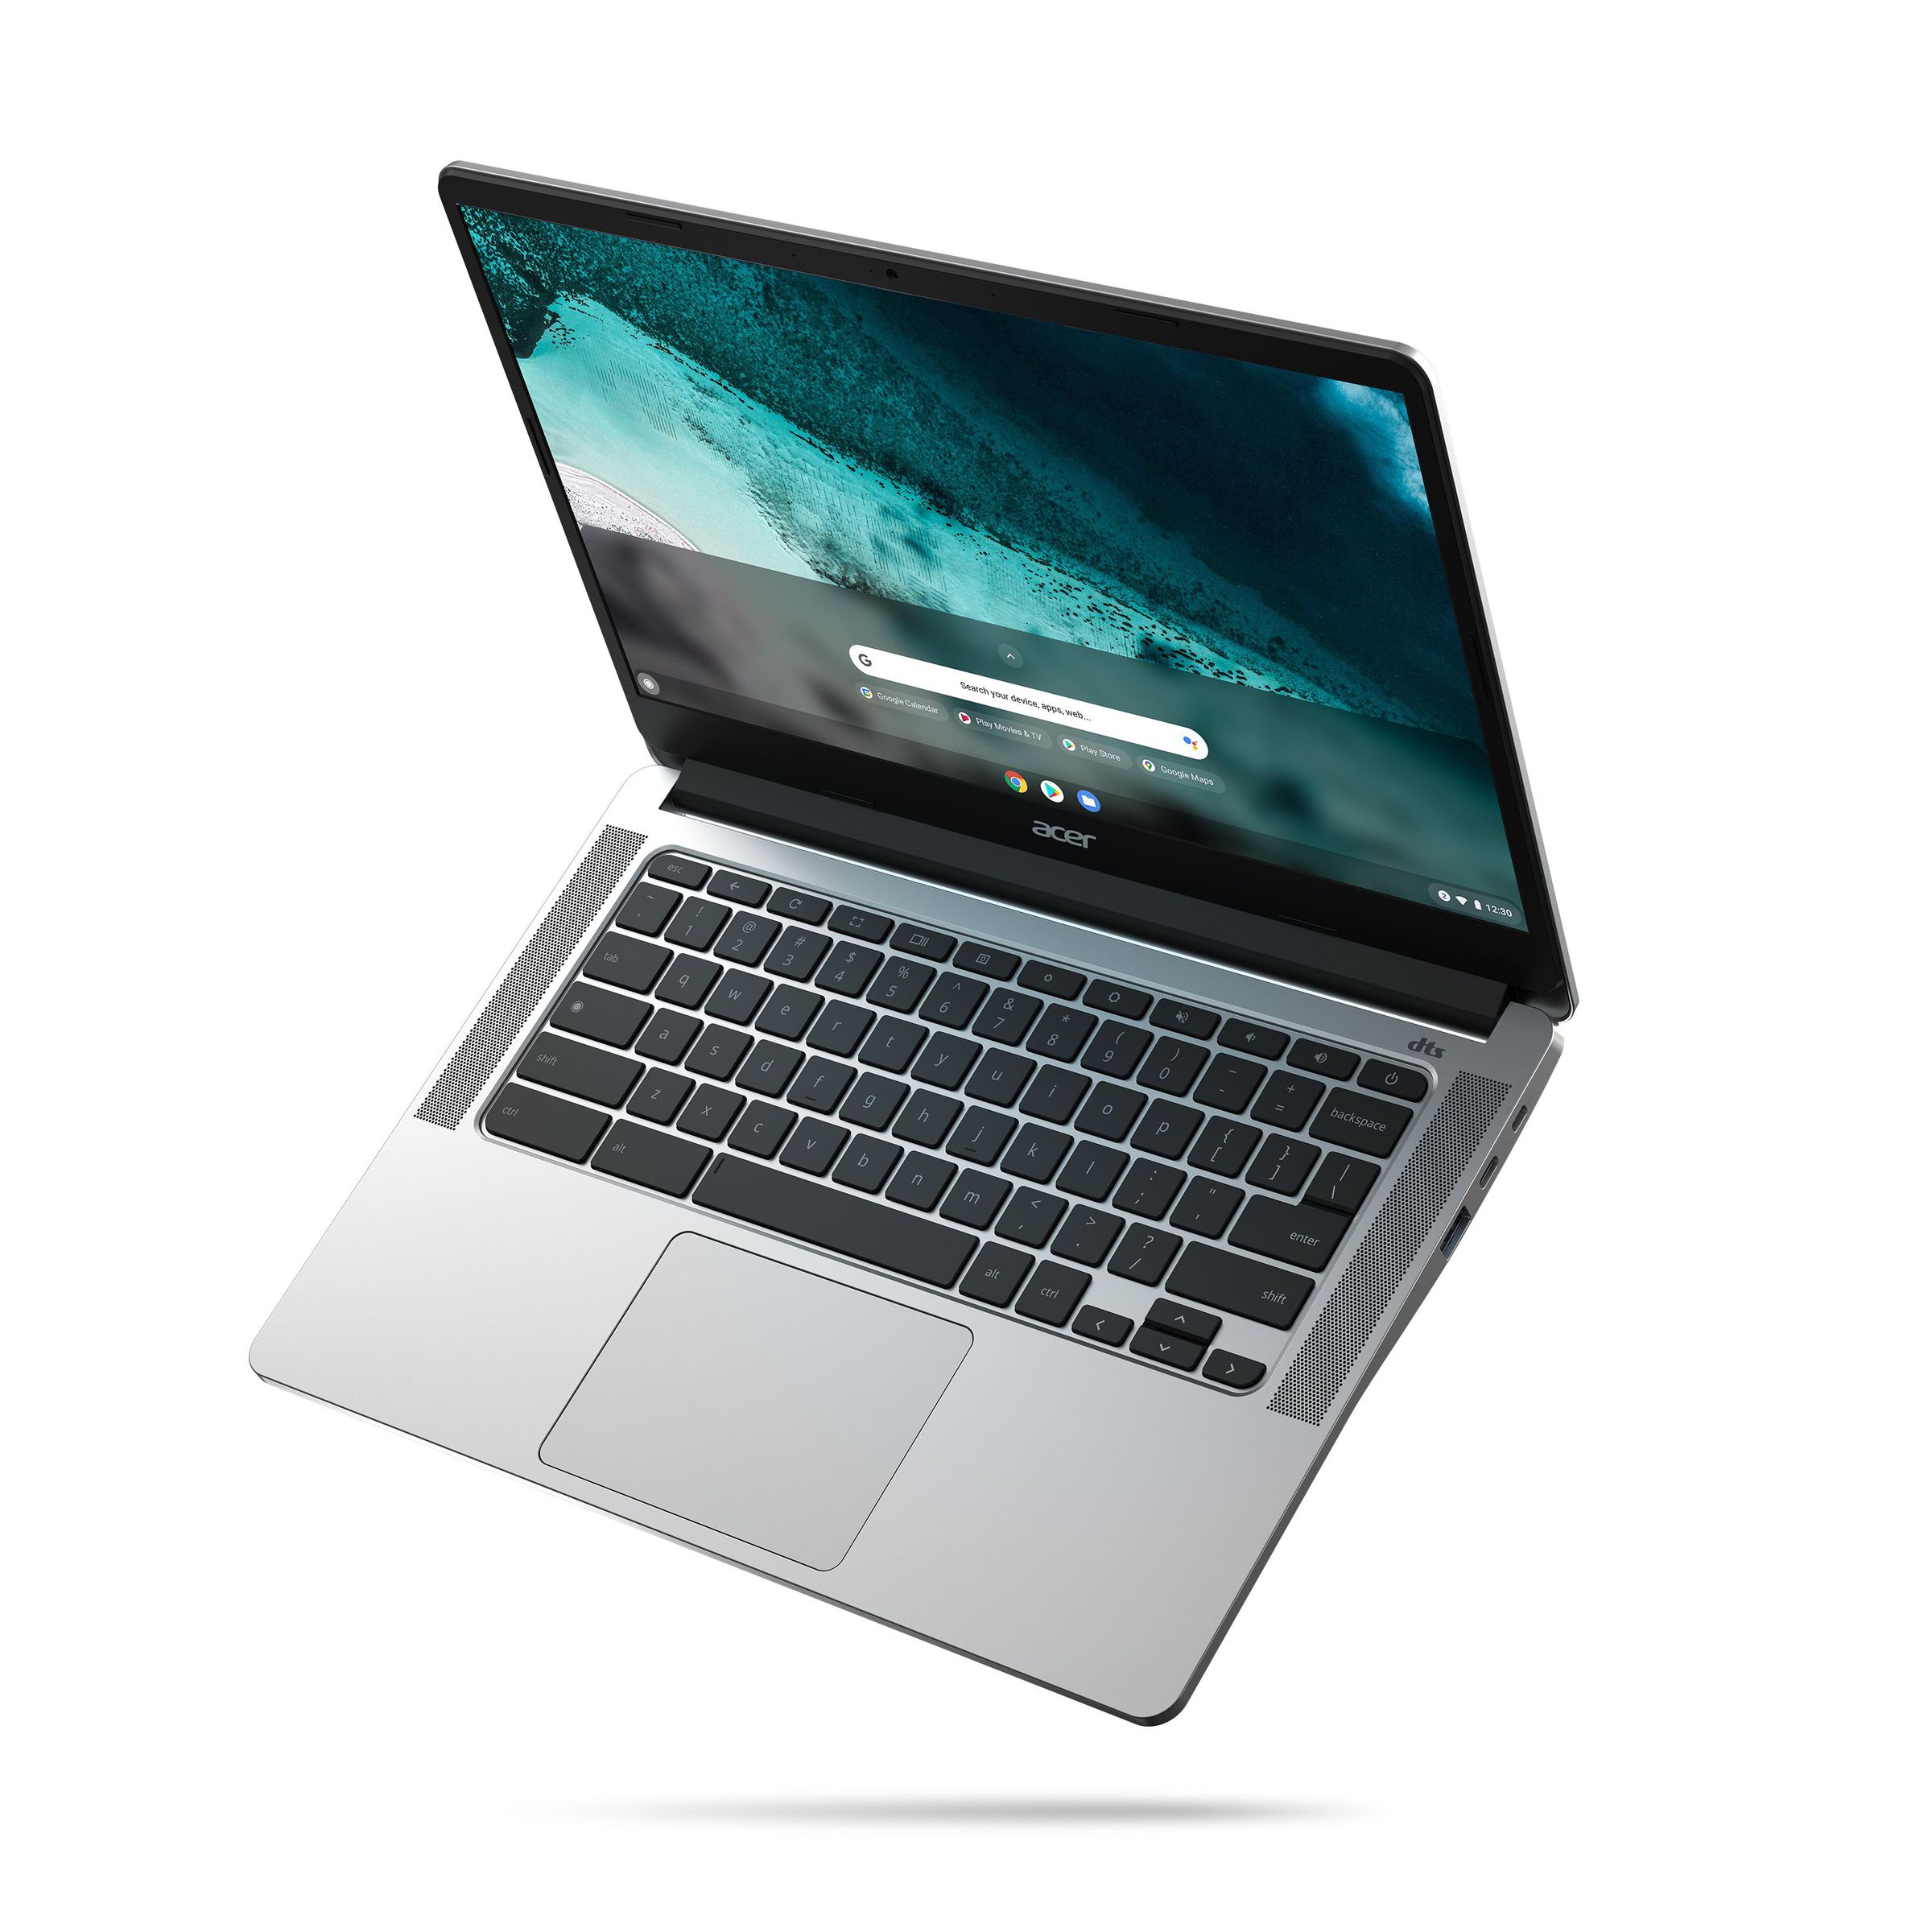 The Acer 314 Chromebook comes with a 14-inch touchscreen display.